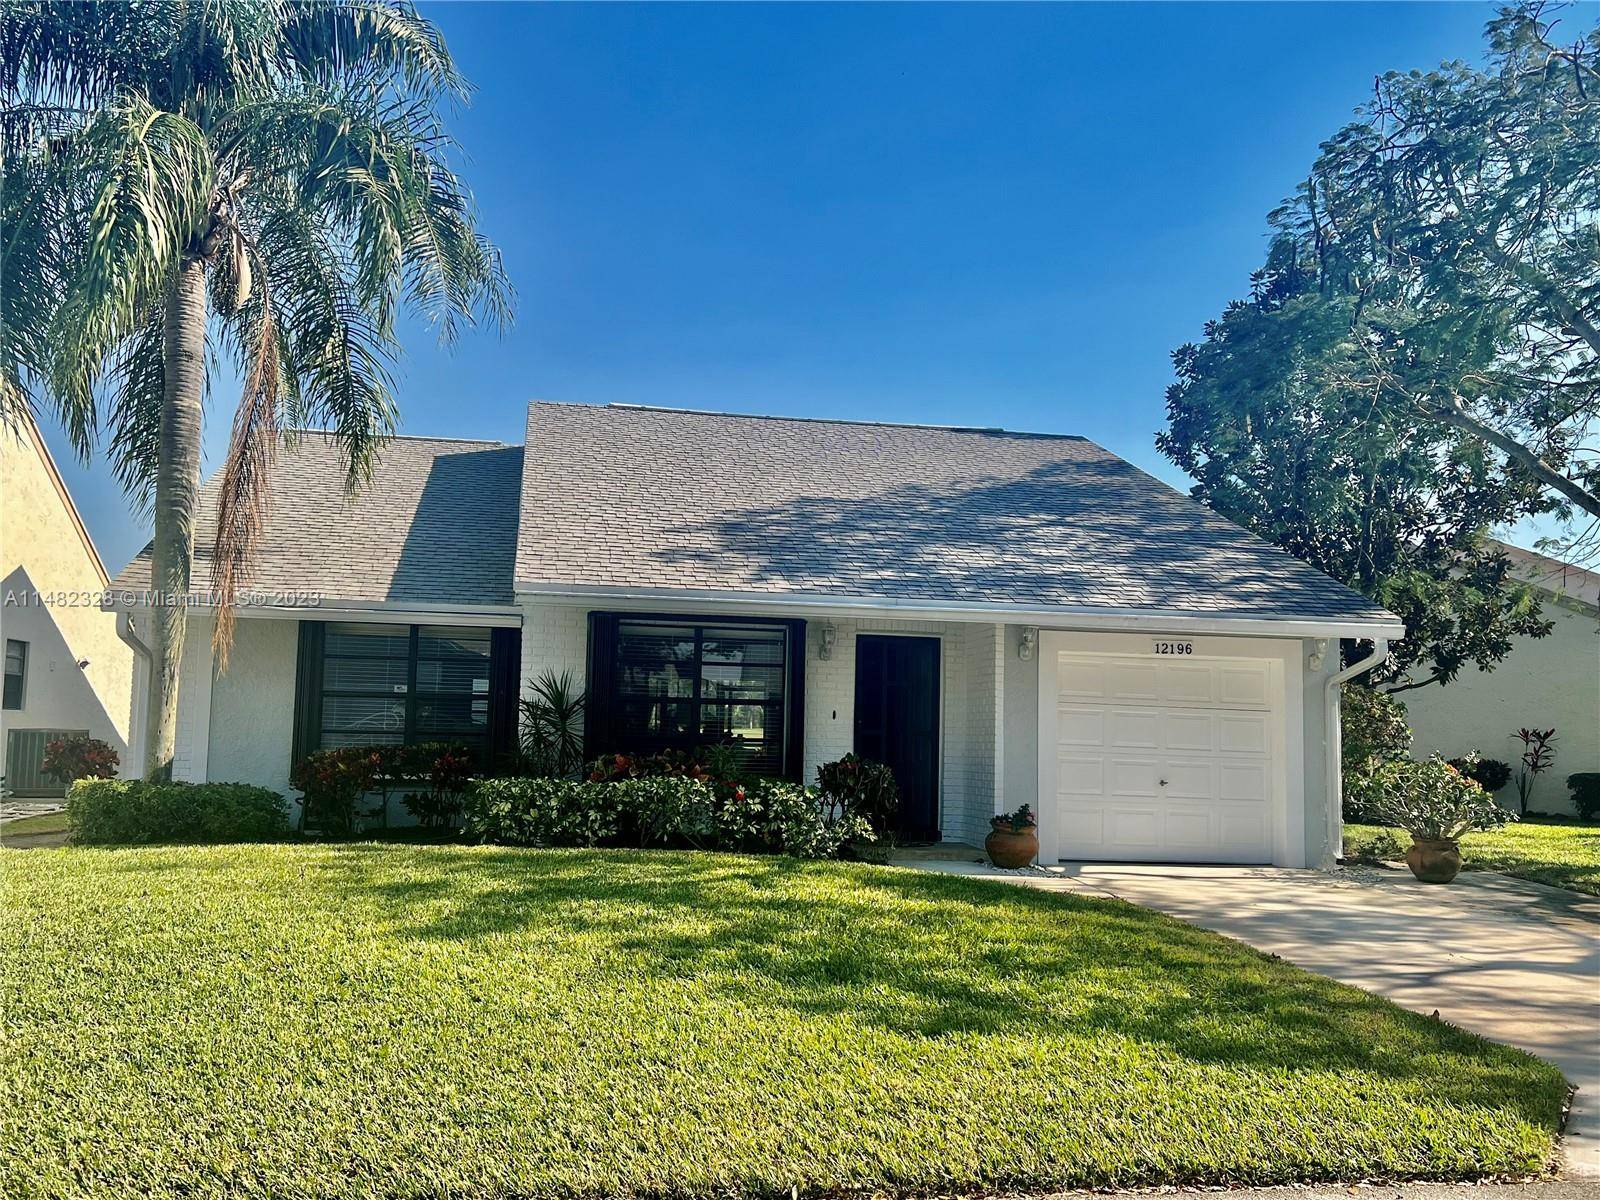 Move in Ready ! Brand New Roof 2023 paid by HOA and rain gutter system A C 2012.